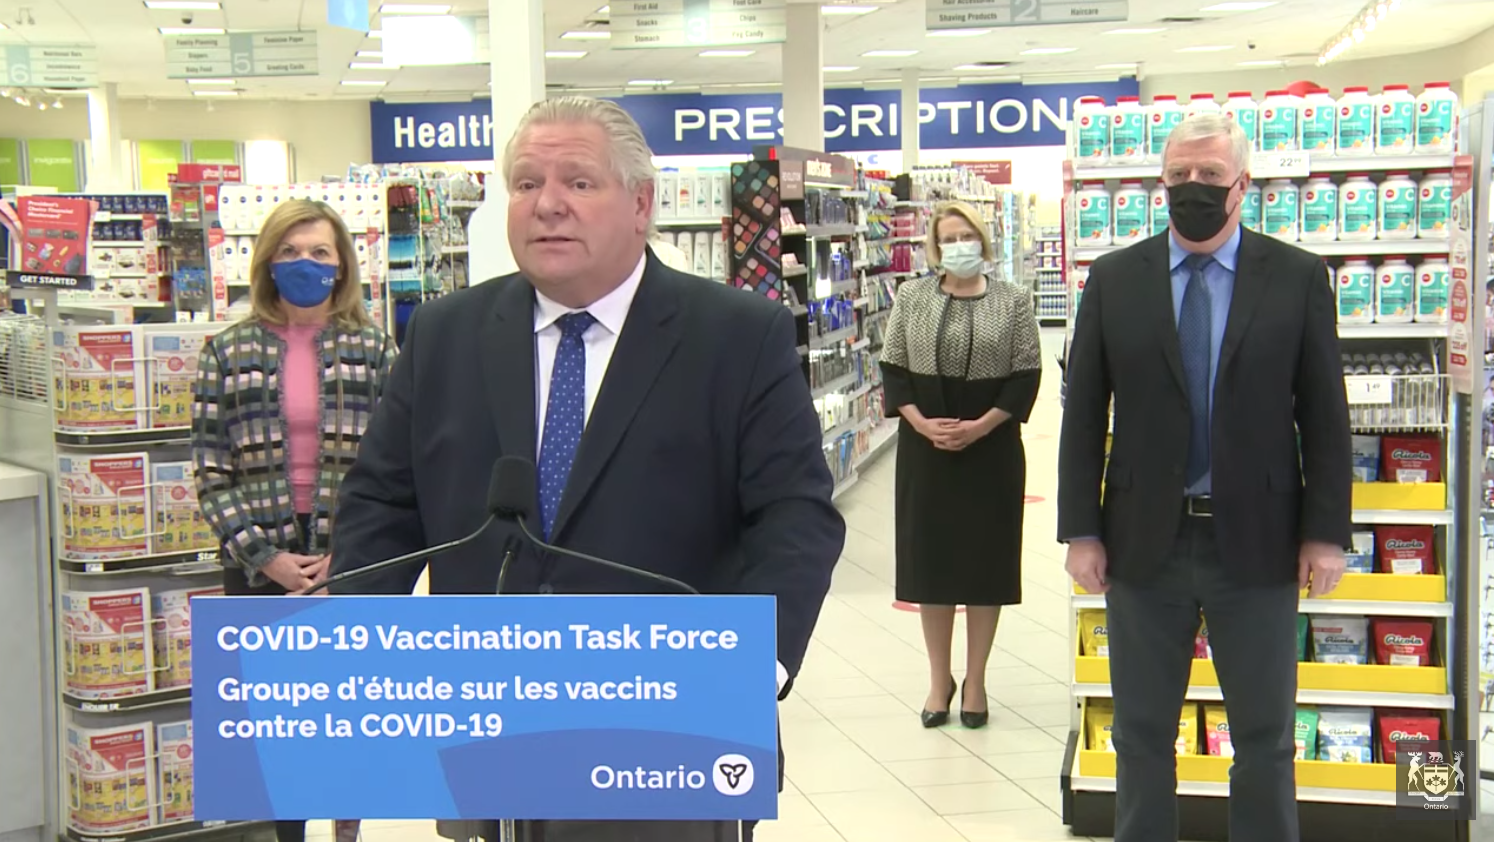 COVID-19 shots at Ontario pharmacies to expand to all those 60 and older